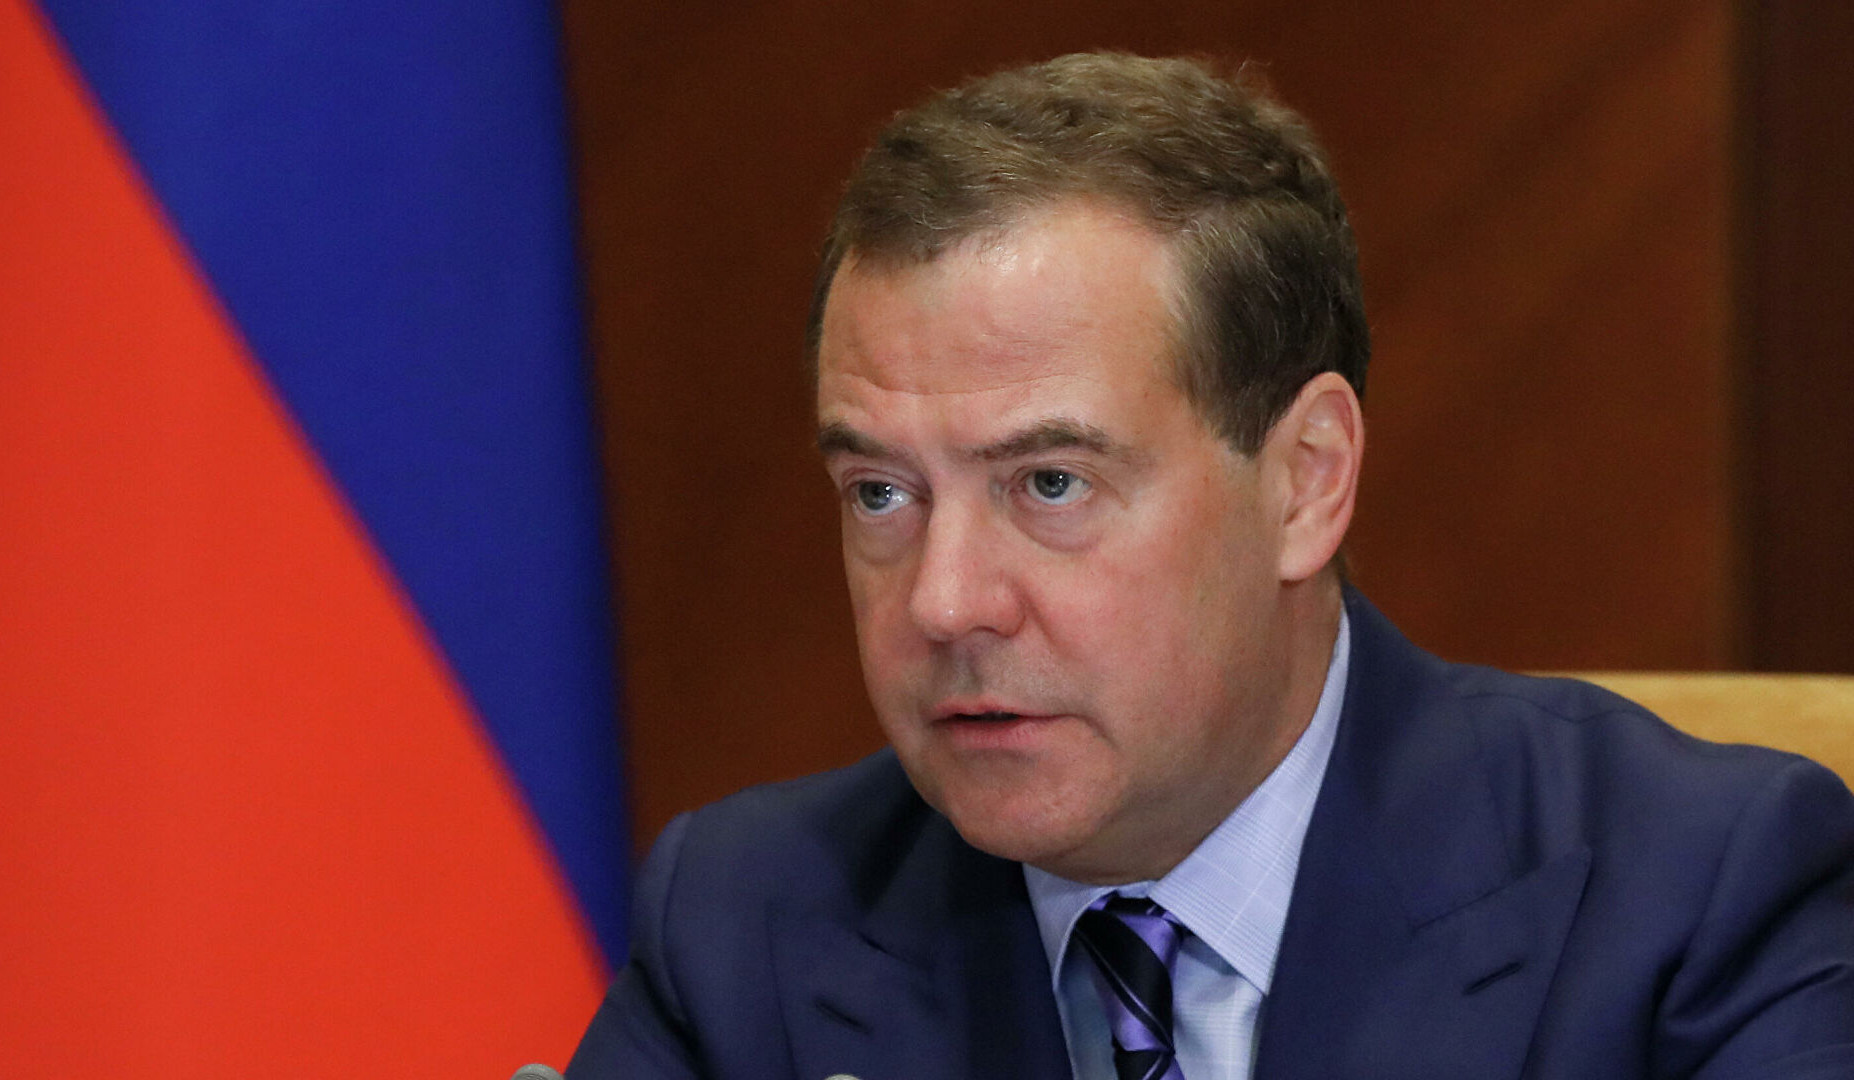 No collapse of Russian economy expected: Medvedev